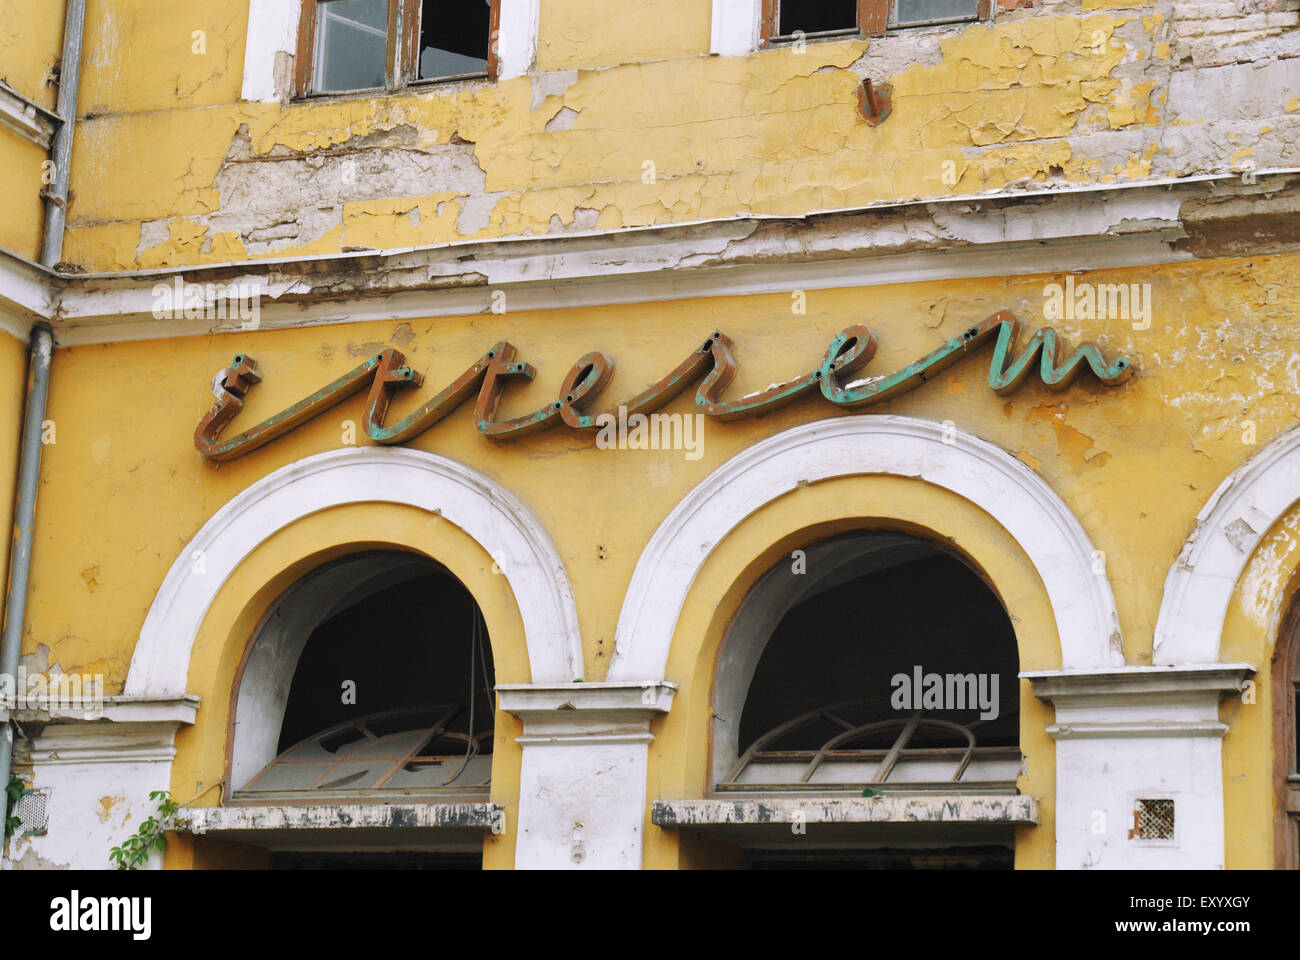 An old communist-era neon 'Étterem' (Restaurant) sign on the façade of a ruined building. Stock Photo